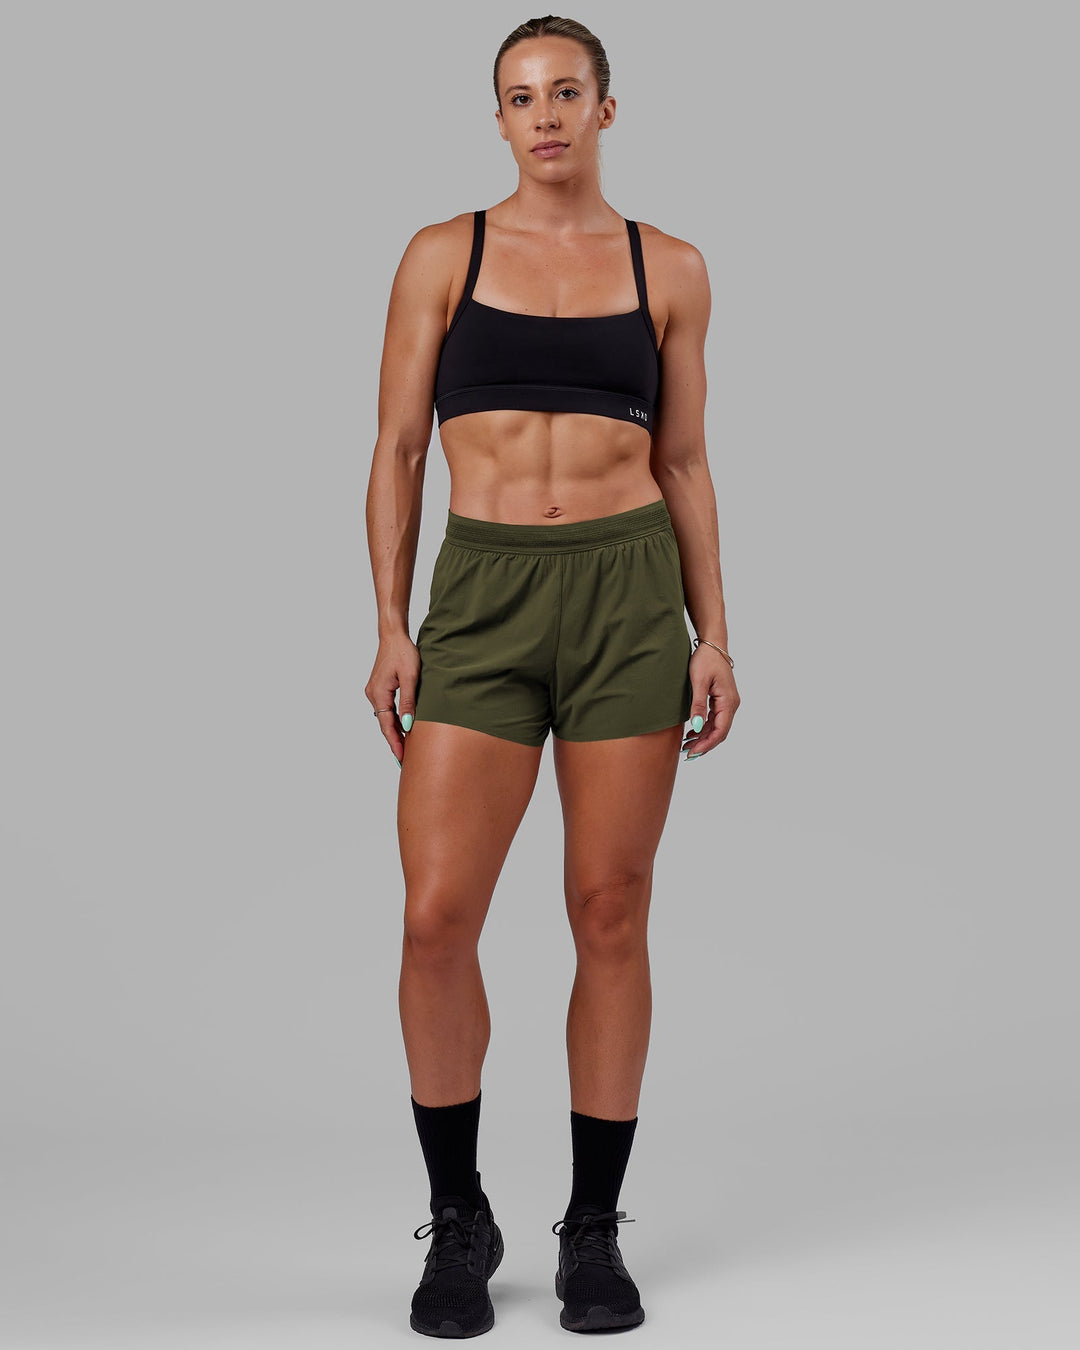 UltraAir Lined Performance Short - Forest Night